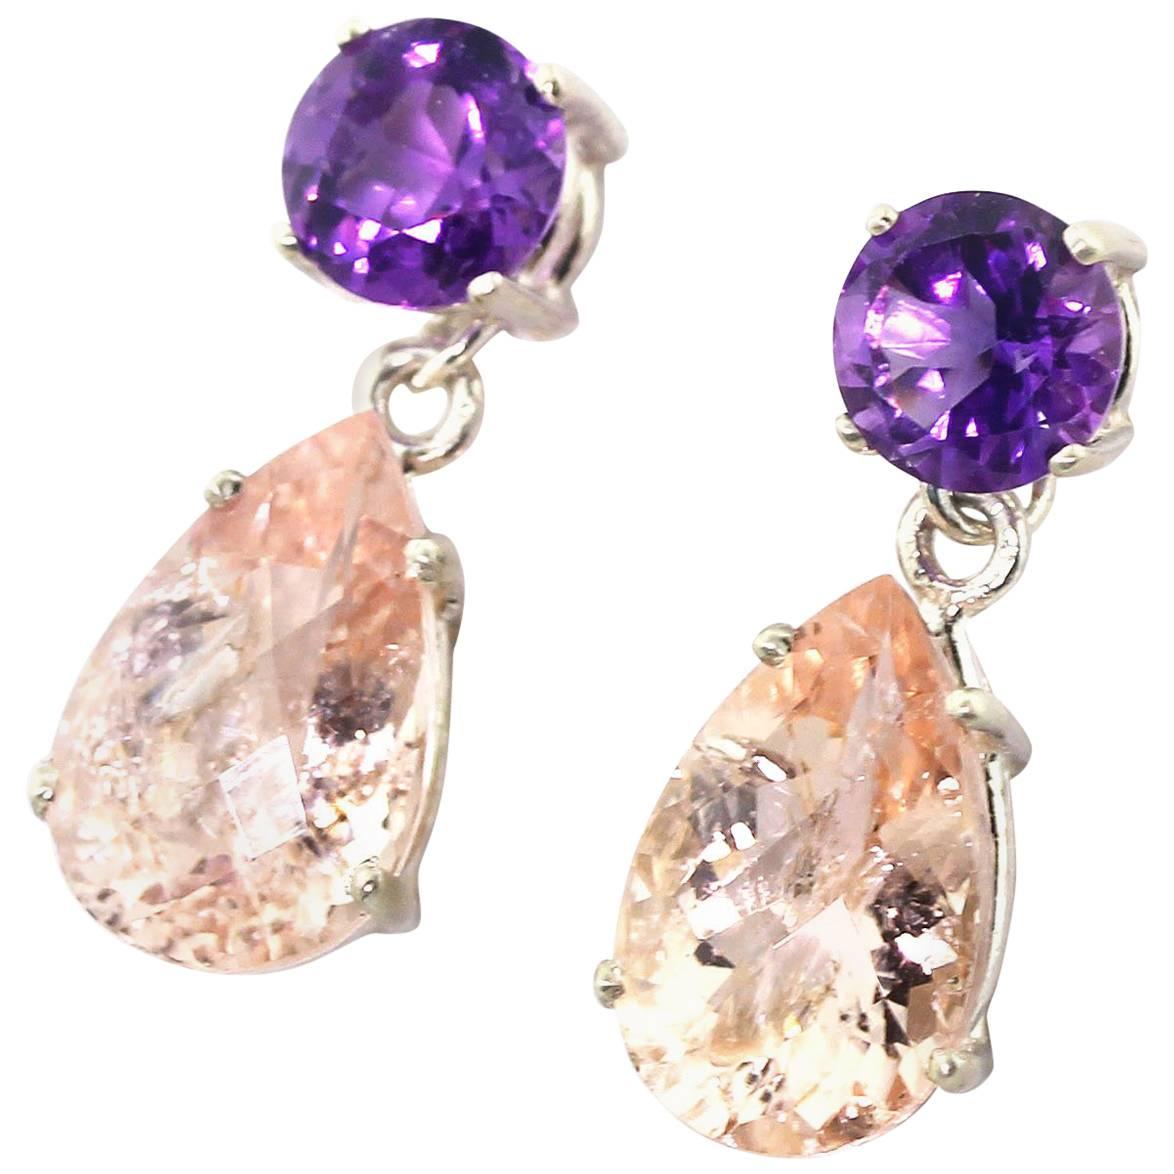 Glittering 15.36 carats of checkerboard gem cut Krinkle pink tone Morganite dangle elegantly from these brilliant 2.41 carats Amethysts set in Sterling Silver stud earrings.  They hang approximately 1 inch long and go directly from daytime to